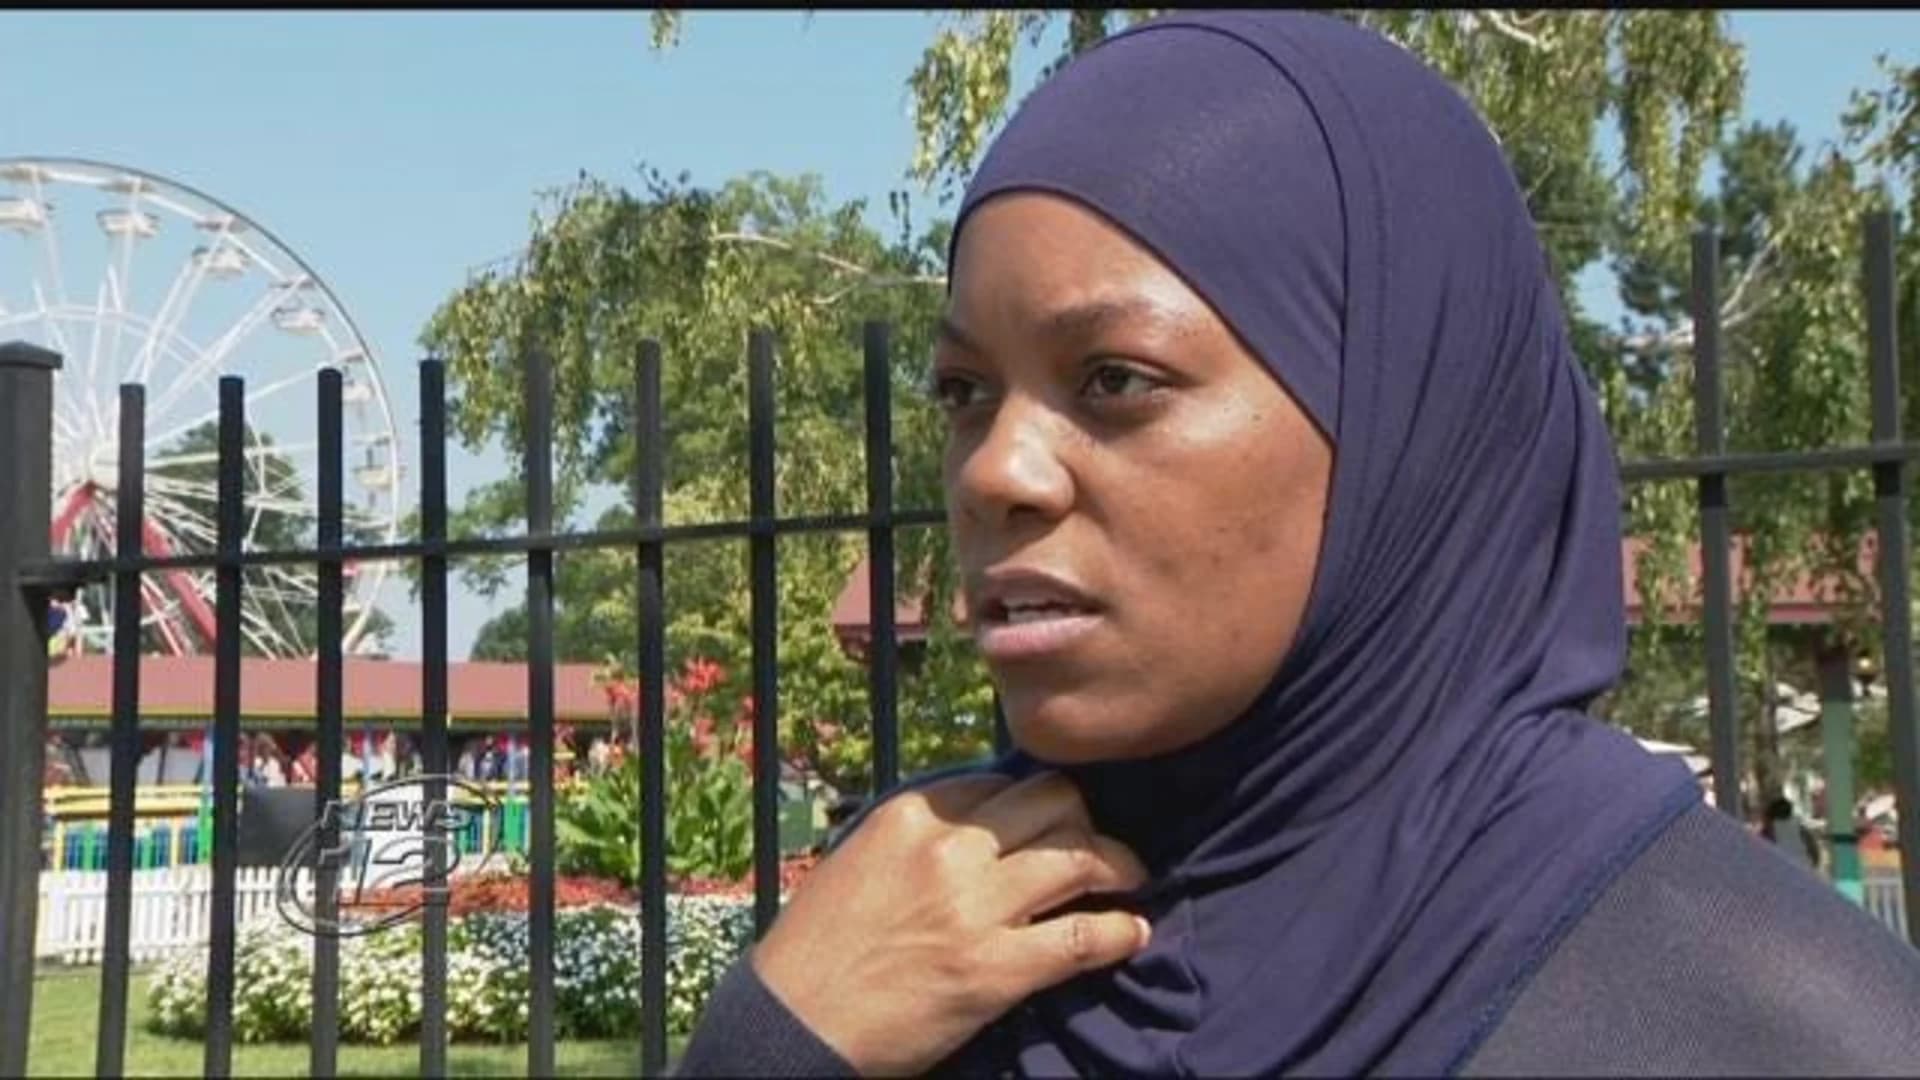 Woman says she was asked to remove hijab at Playland